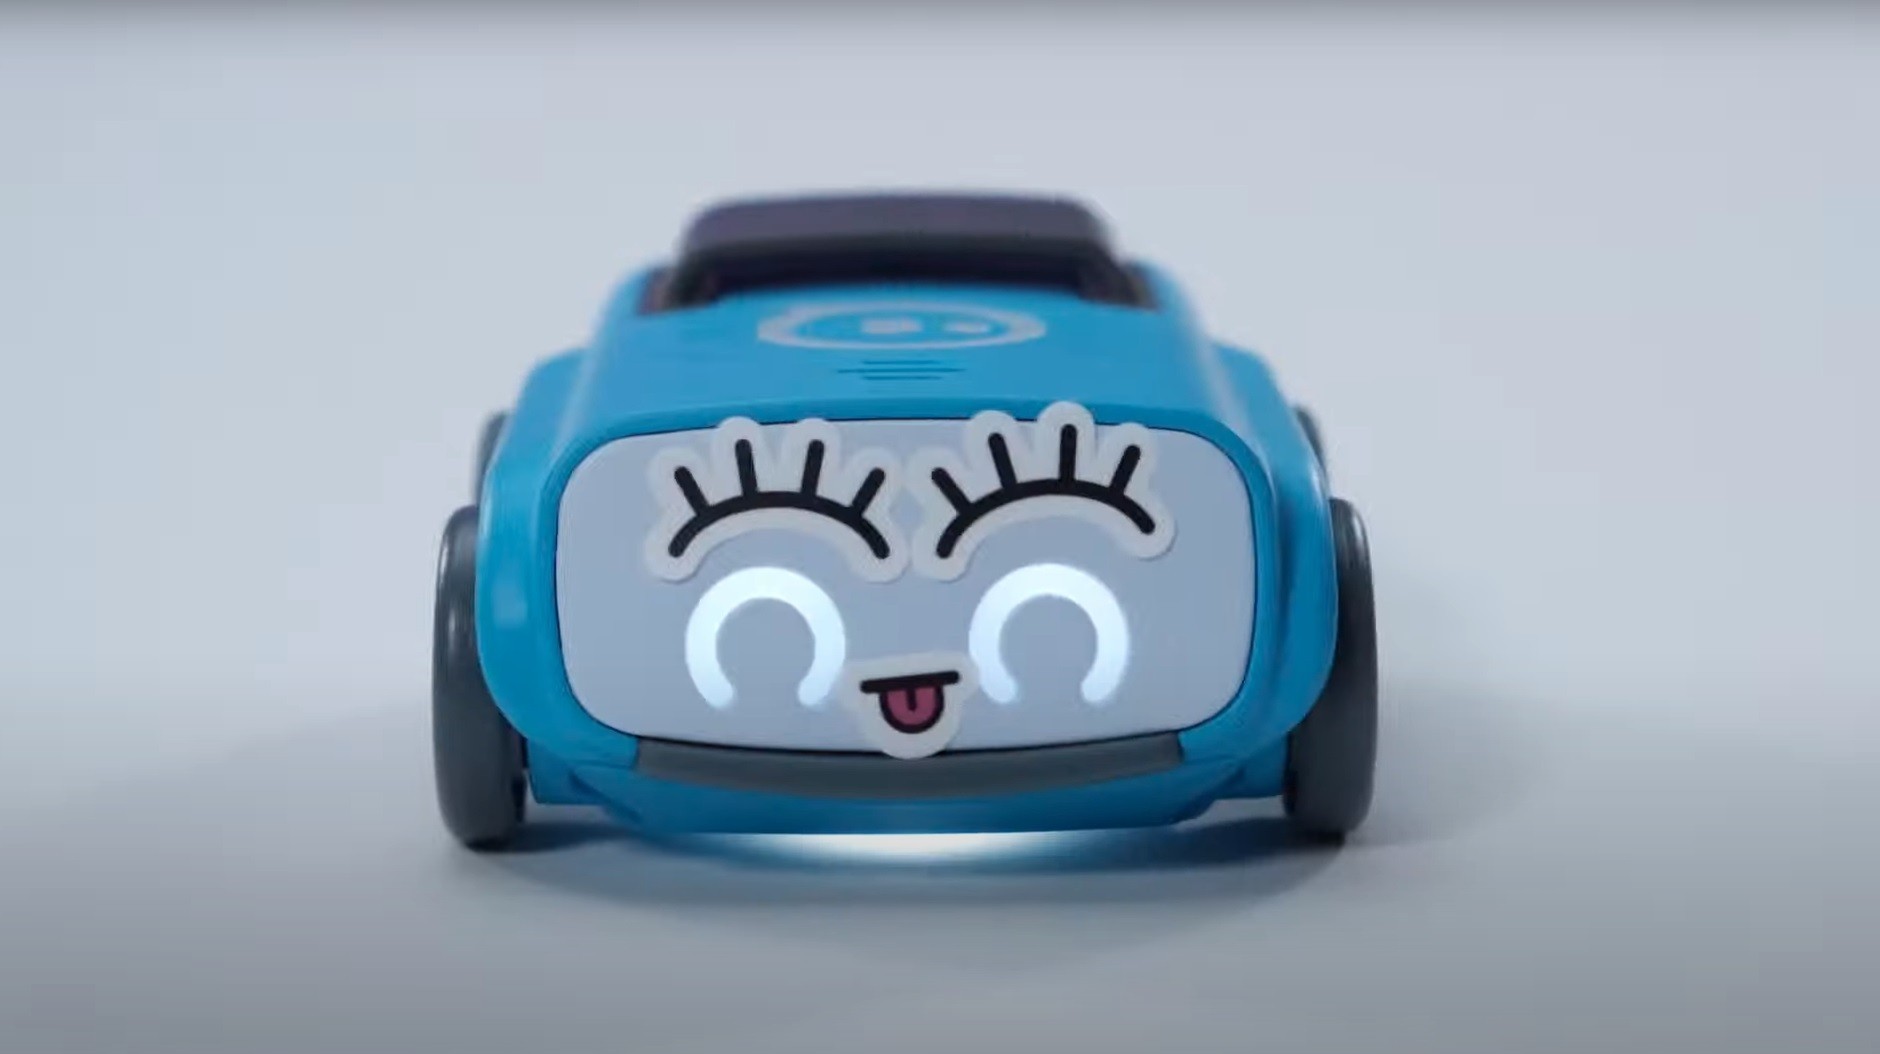 https://s1.cdn.autoevolution.com/images/news/gallery/the-teacher-of-tomorrow-is-a-cute-car-like-robot-by-the-name-of-indi_13.jpg